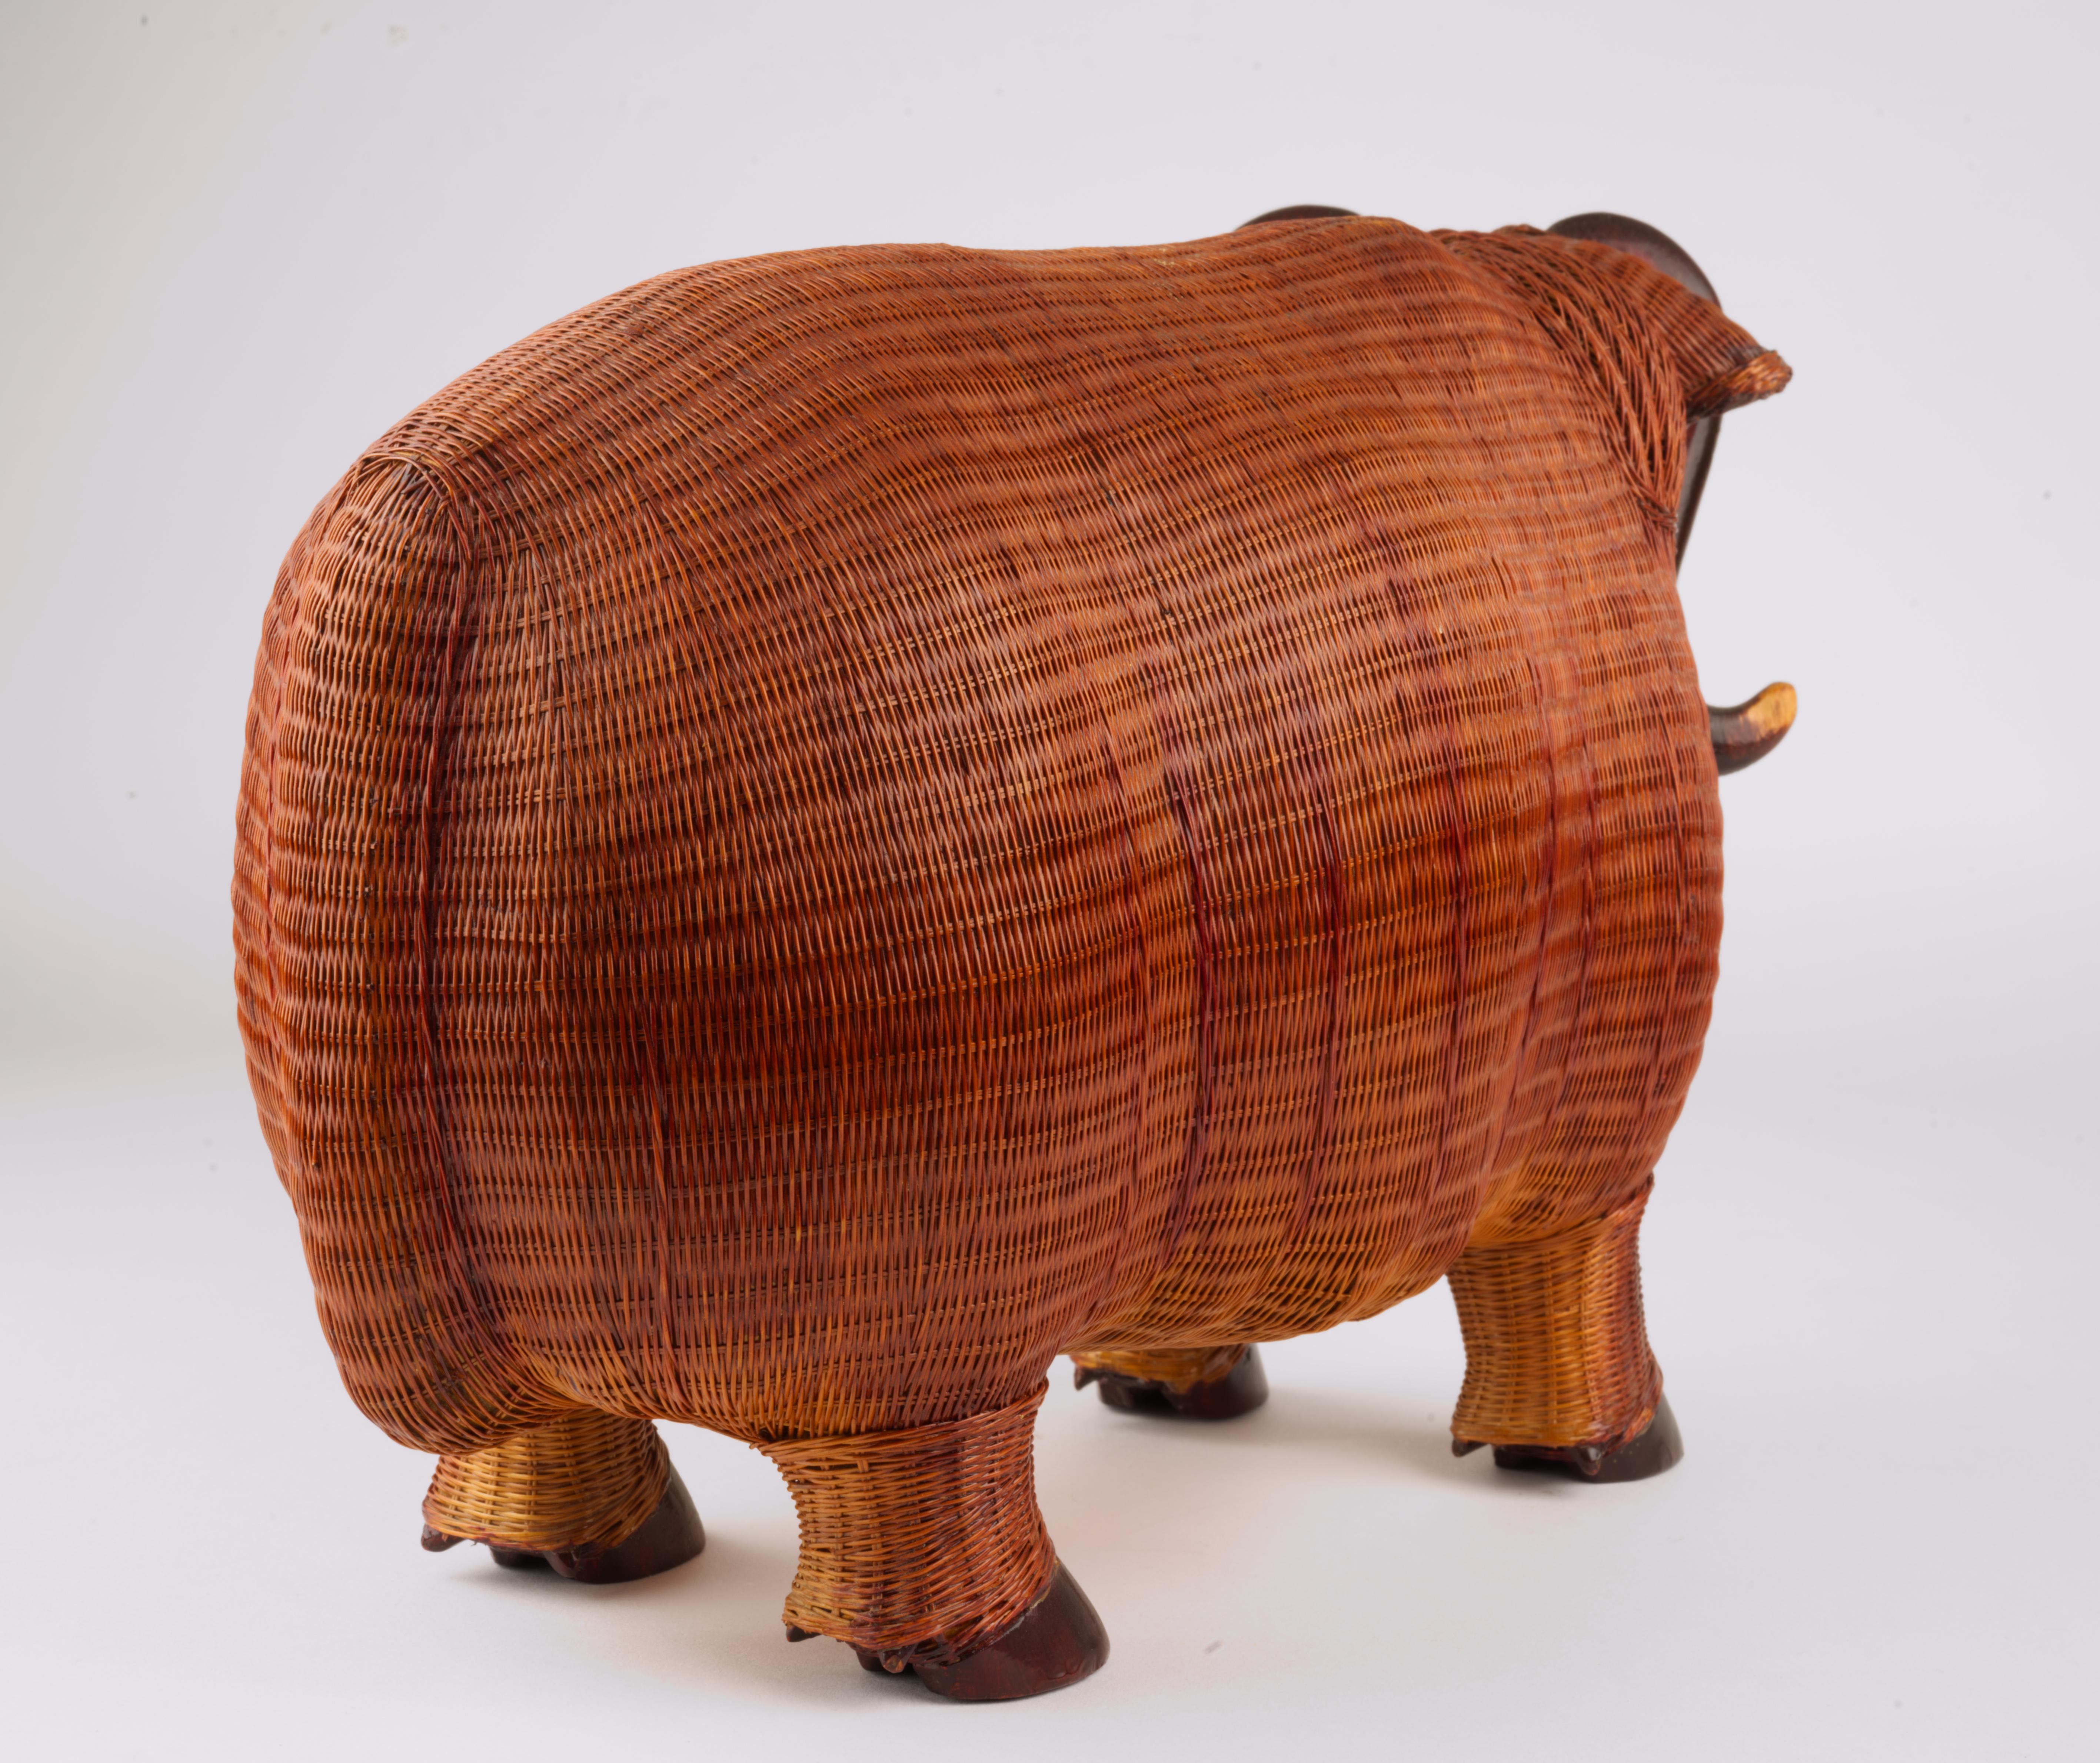 Wicker Water Buffalo Figurine by Shanghai Handicrafts In Good Condition For Sale In Clifton Springs, NY